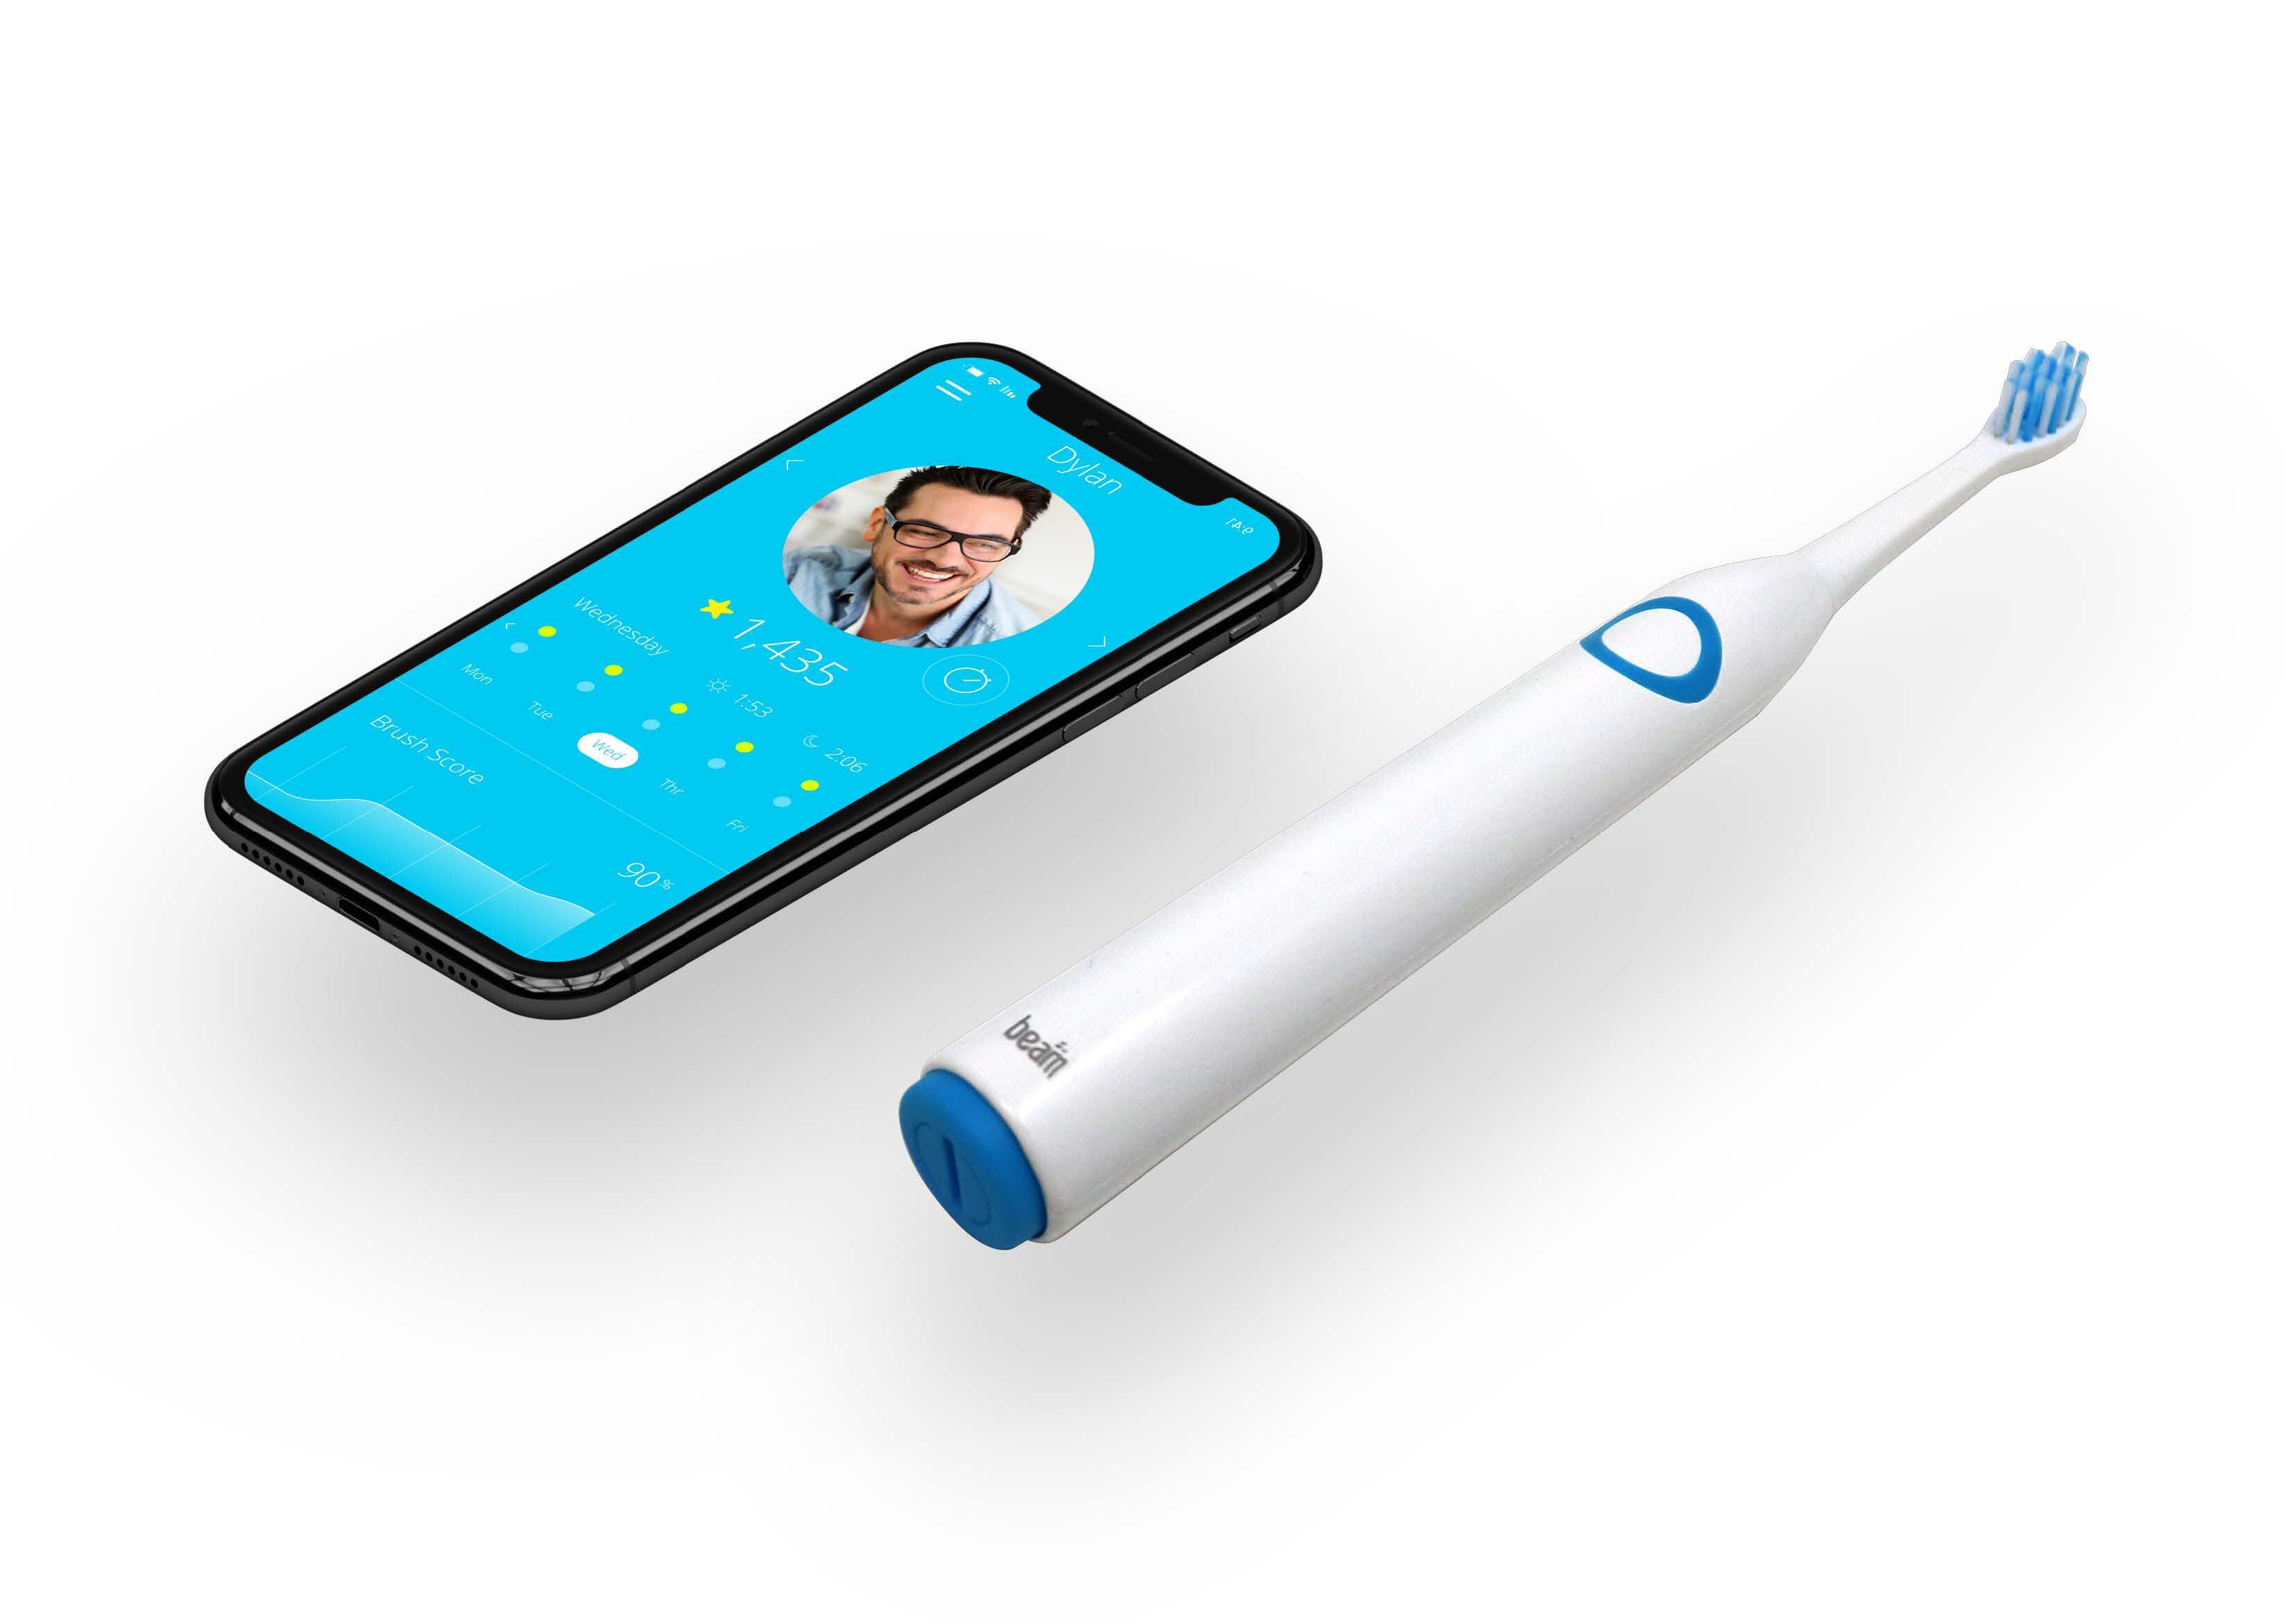 Beam toothbrush and mobile phone app